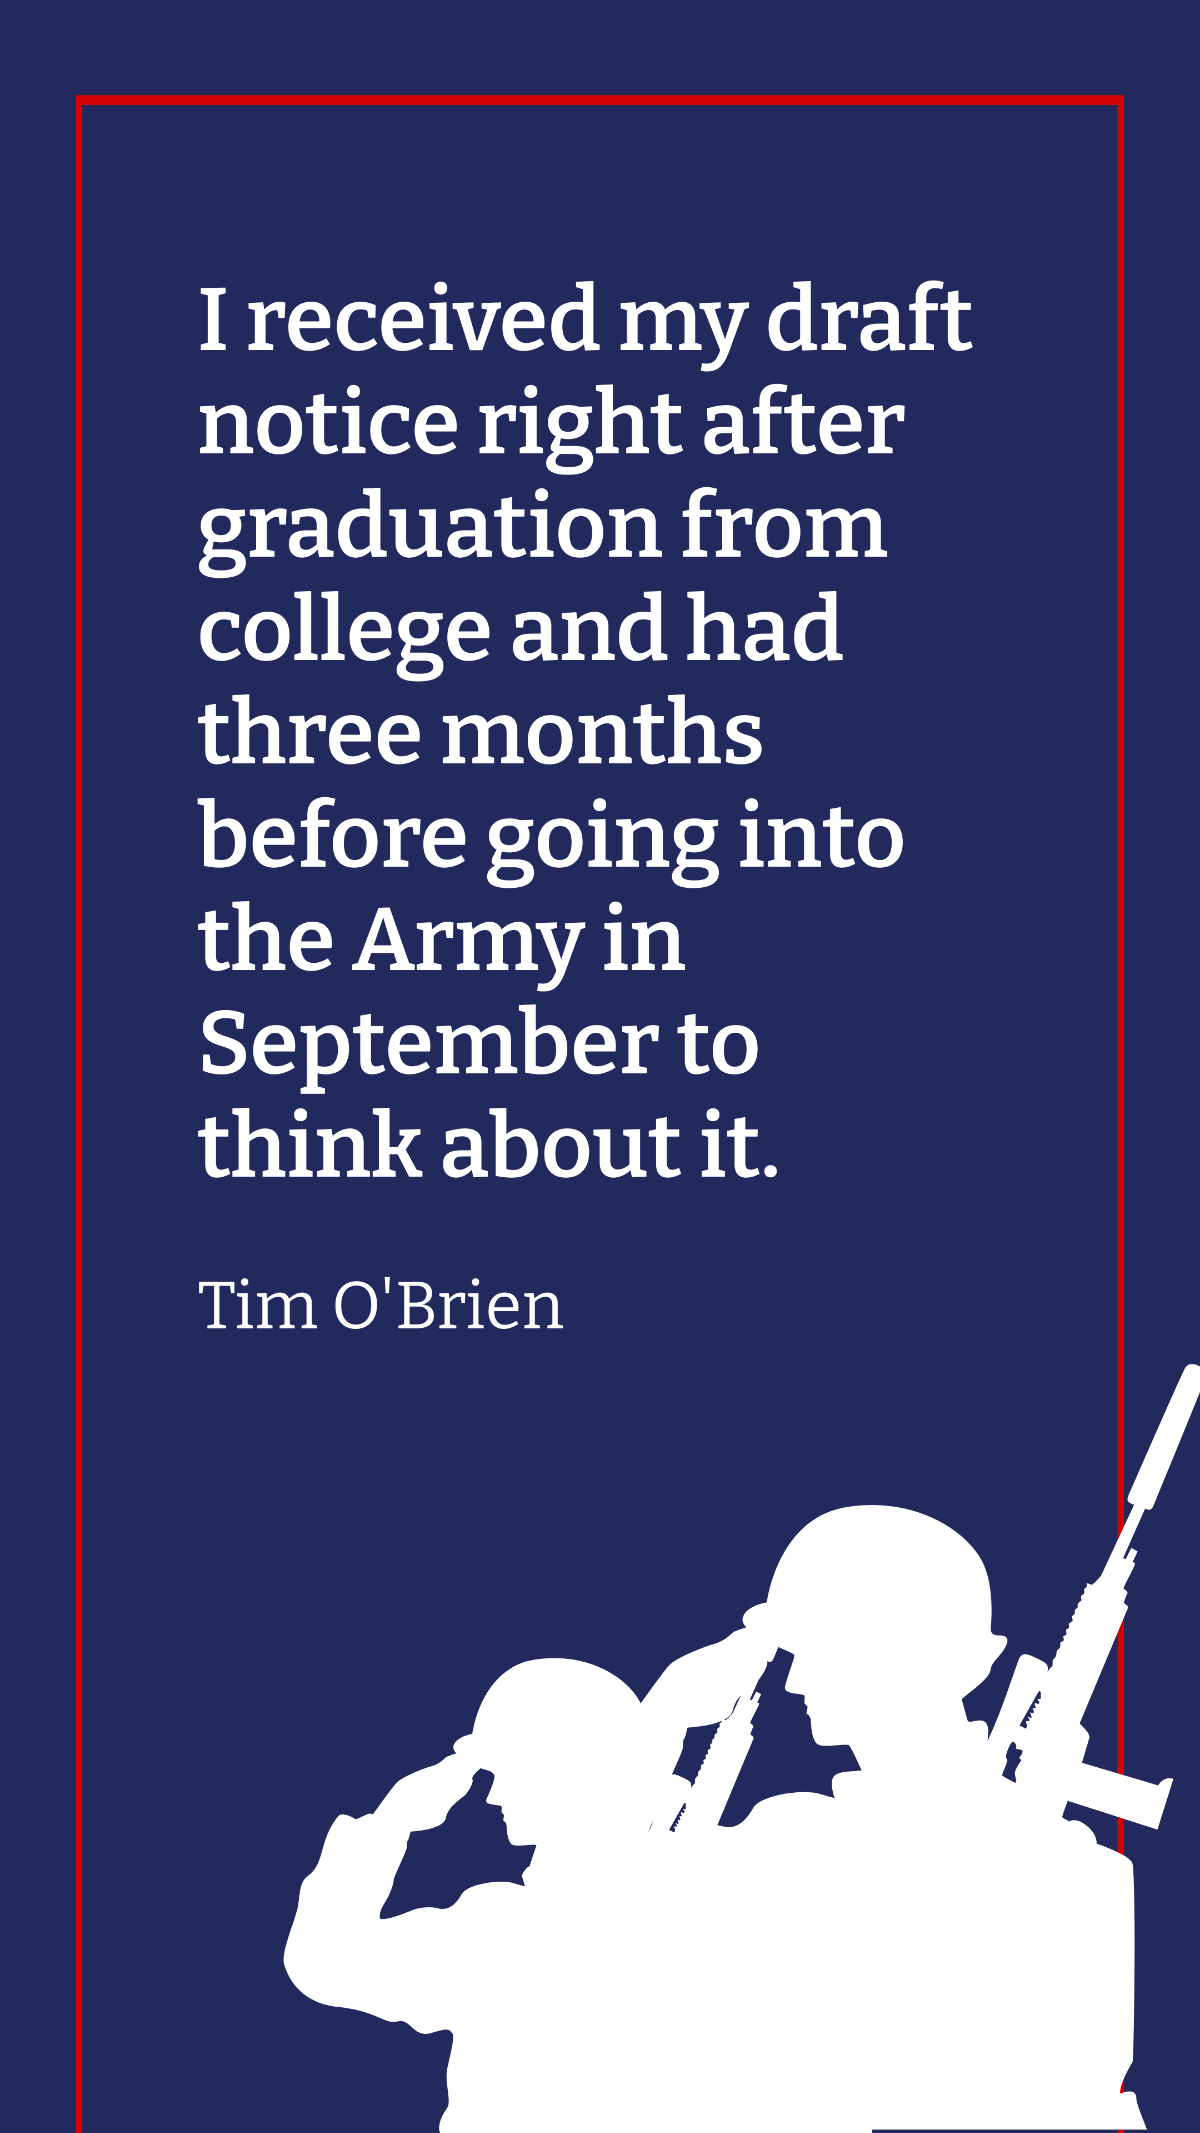 Tim O'Brien - I received my draft notice right after graduation from college and had three months before going into the Army in September to think about it.